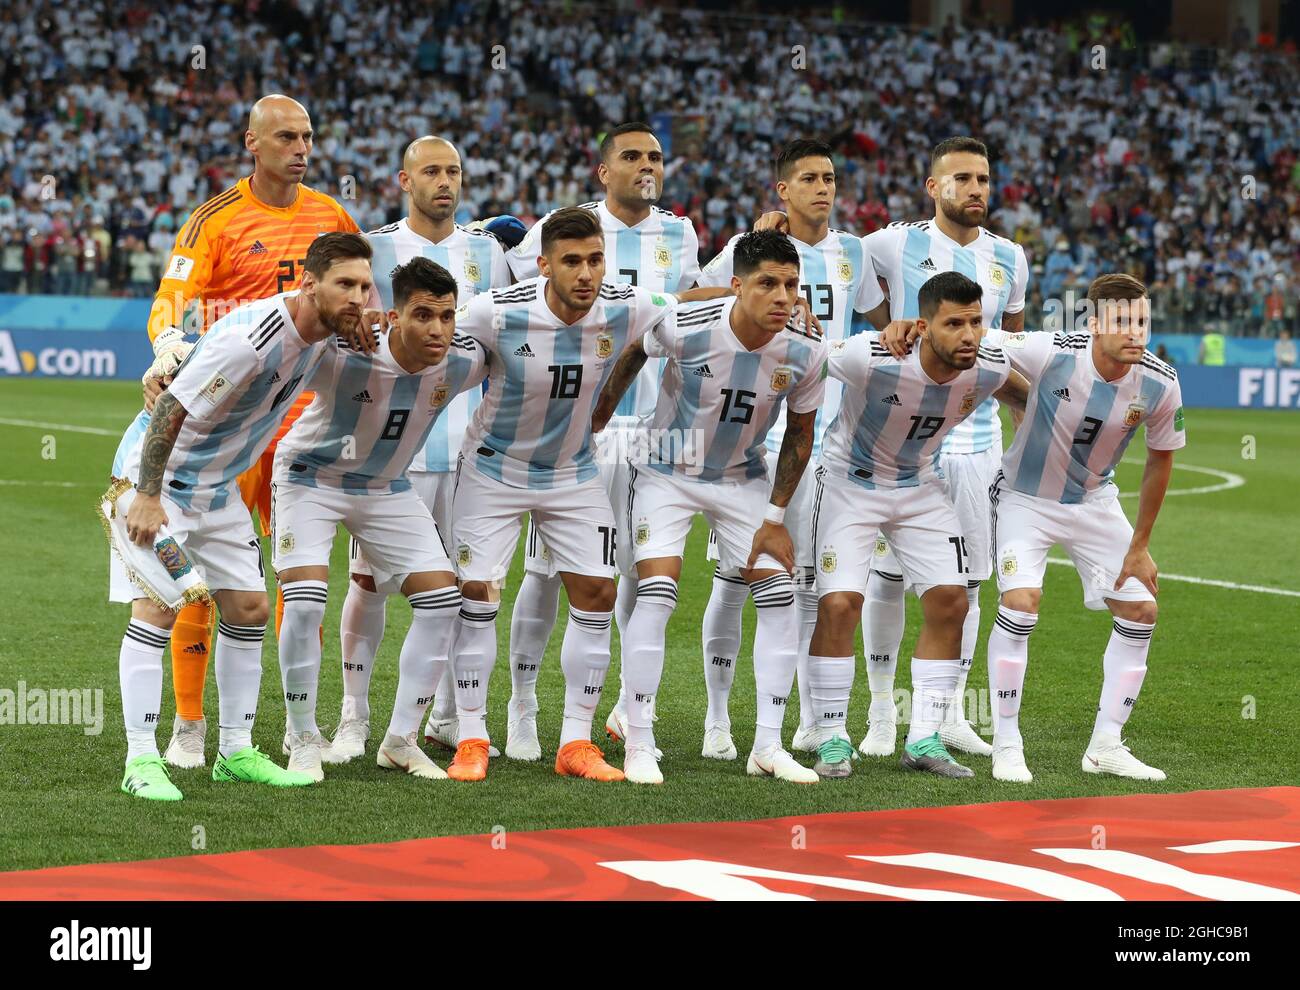 Argentina team group during the FIFA World Cup 2018 Group D match at the  Nizhny Novgorod Stadium, Nizhny Novgorod. Picture date 21st June 2018.  Picture credit should read: David Klein/Sportimage via PA